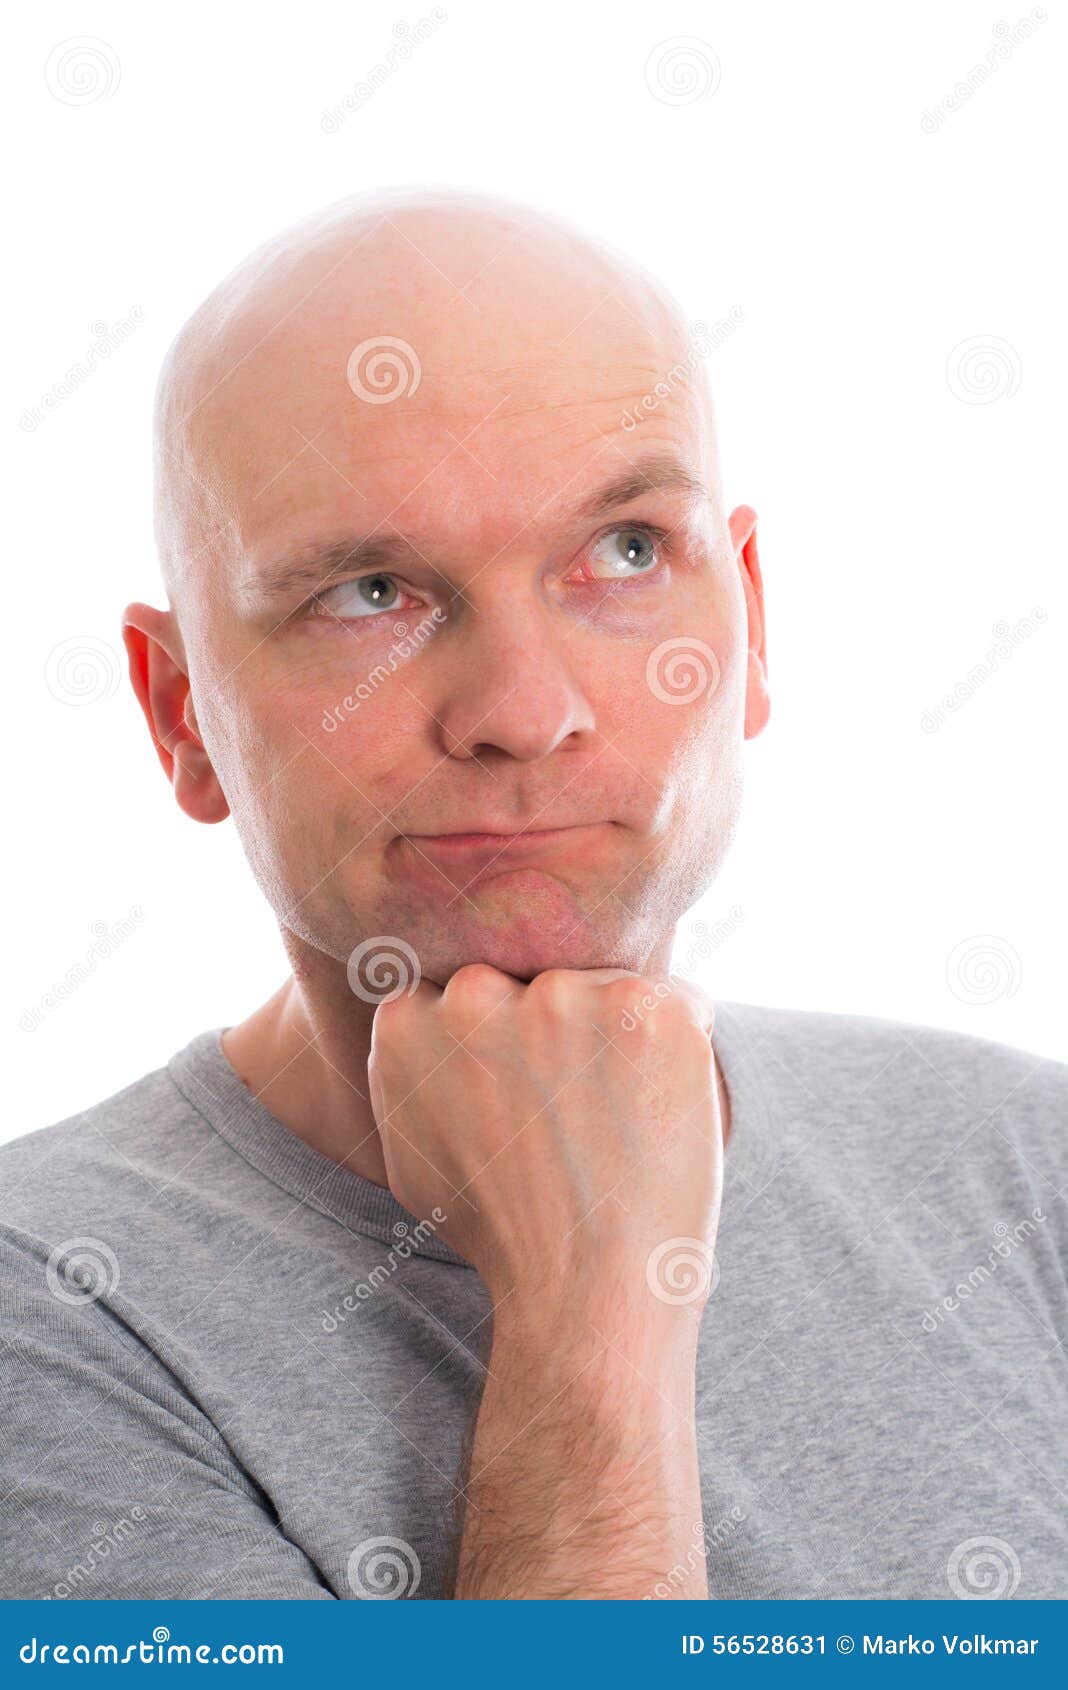 Funny Man with Bald Head is Refacting Stock Image - Image of skin, dome:  56528631